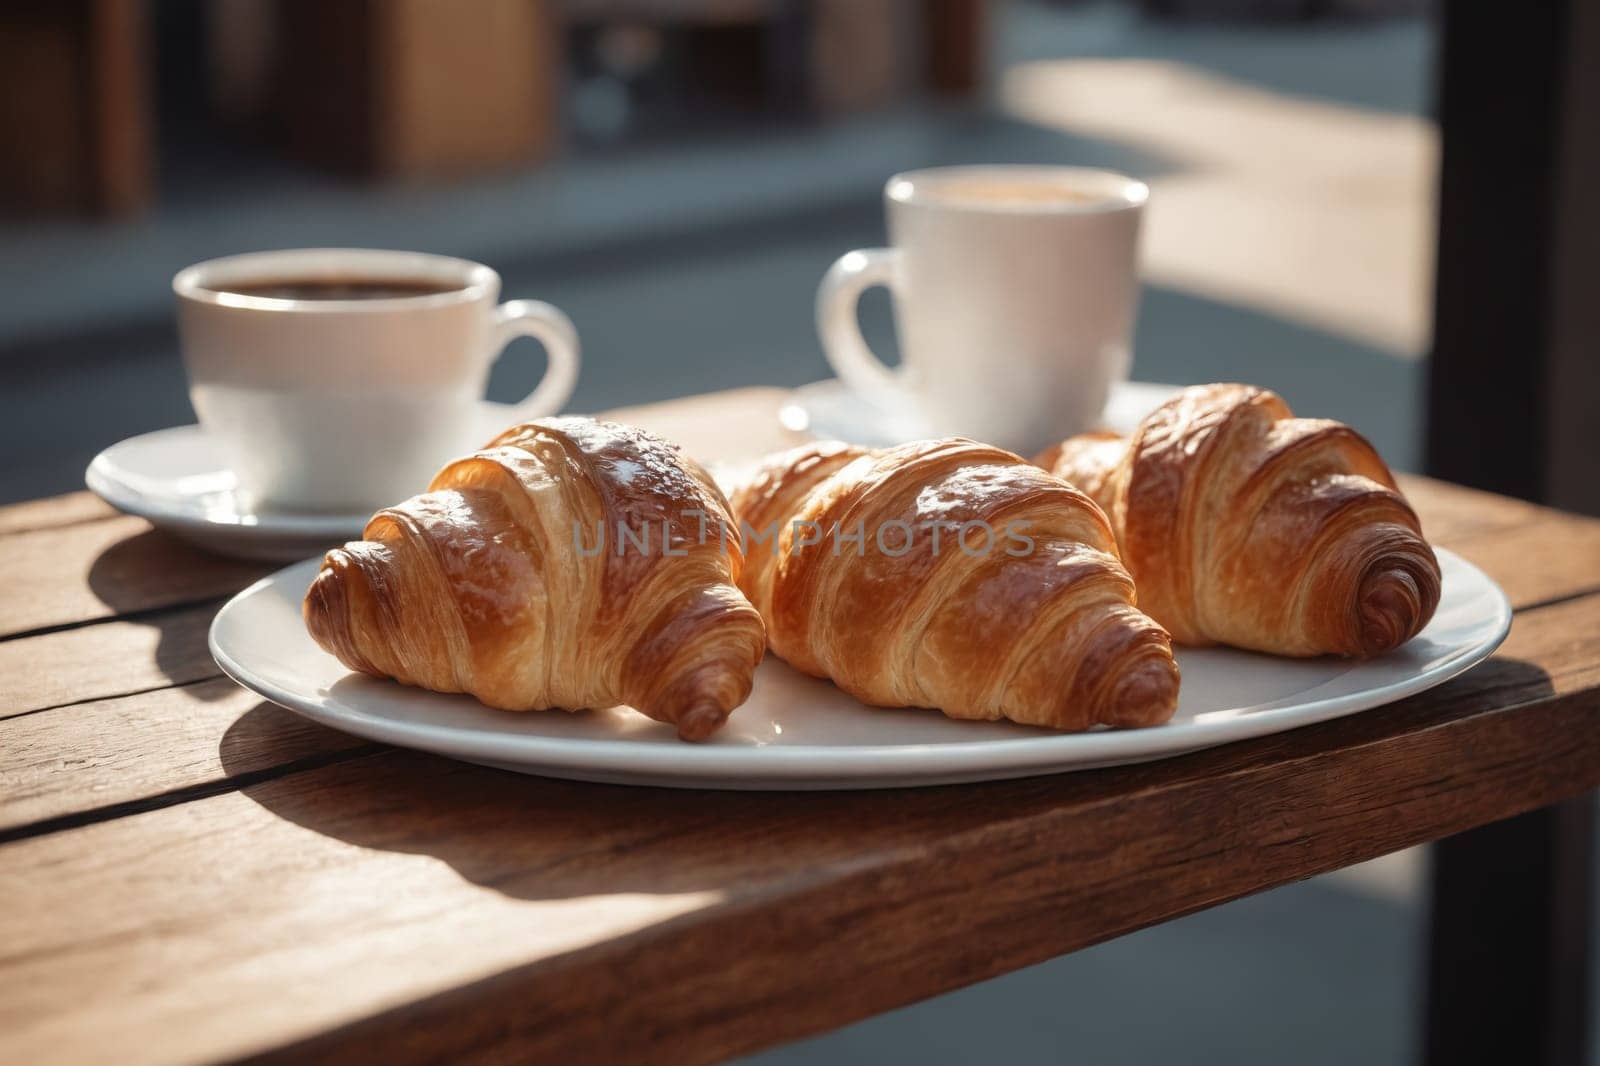 Enjoy a perfect morning with freshly baked croissants and aromatic coffee.